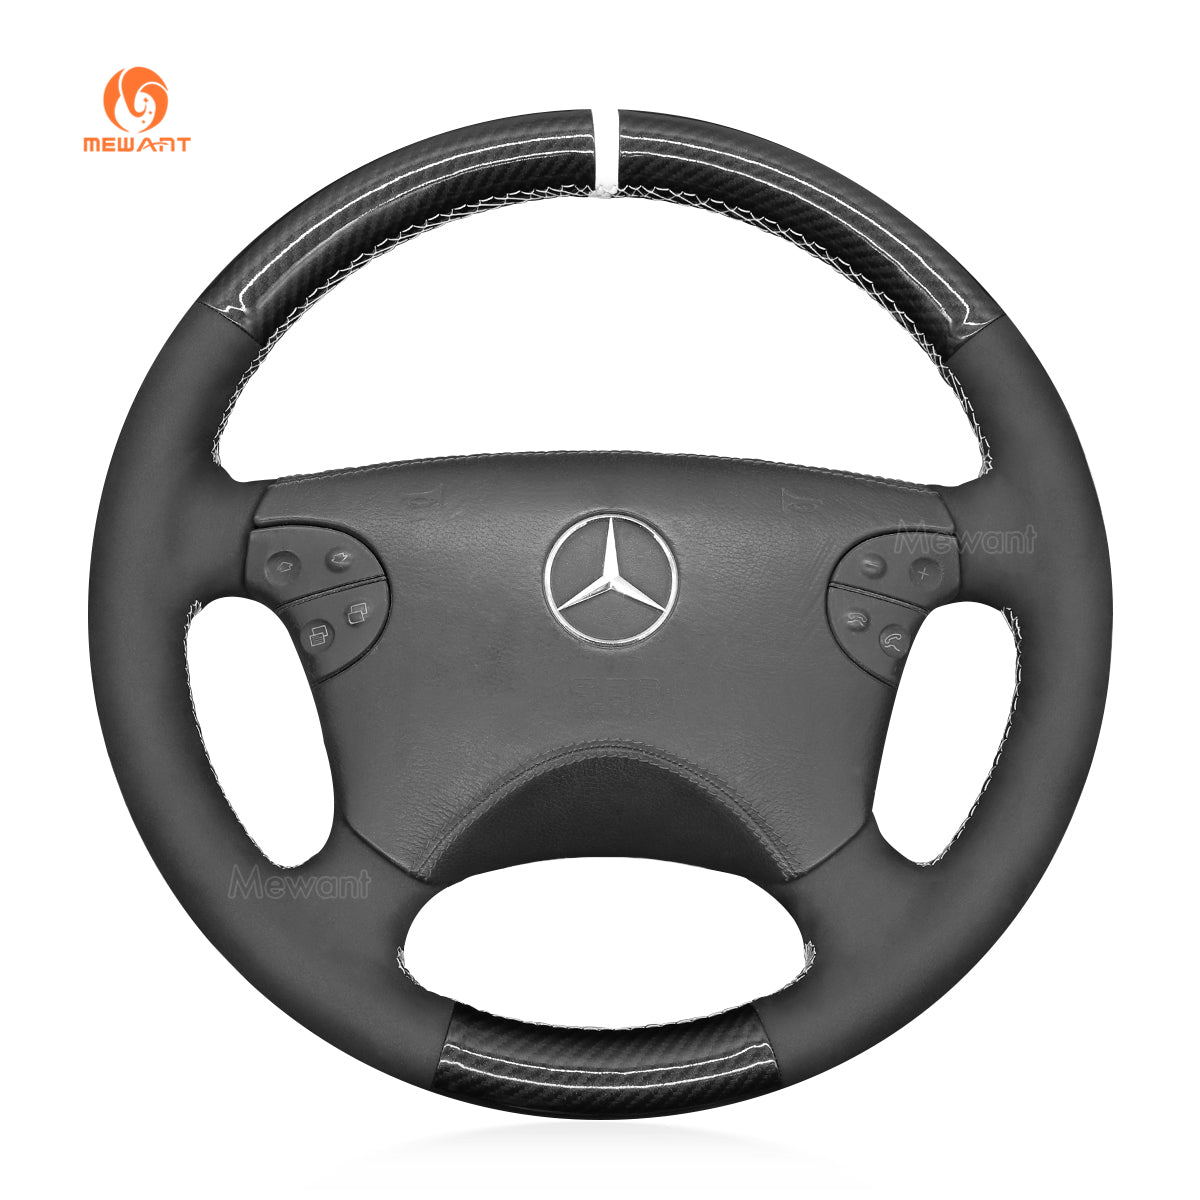 MEWANT Hand Stitch Car Steering Wheel Cover for Mercedes Benz CLK